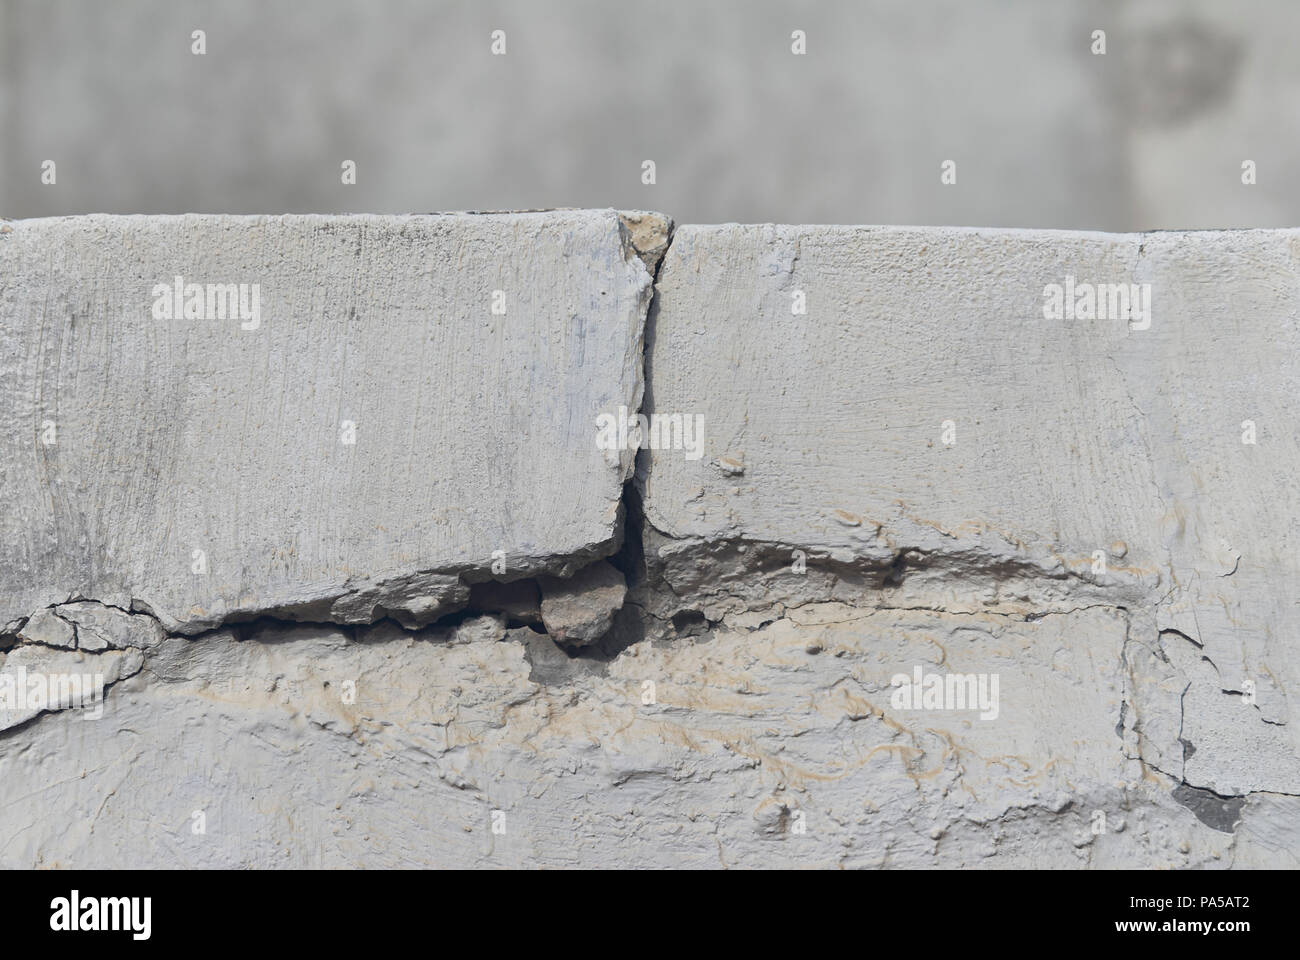 COATZACOALCOS, VER/MEXICO - JULY 18, 2018: Detail of perimetral concrete block wall showing signs of crack due to seismic activity Stock Photo